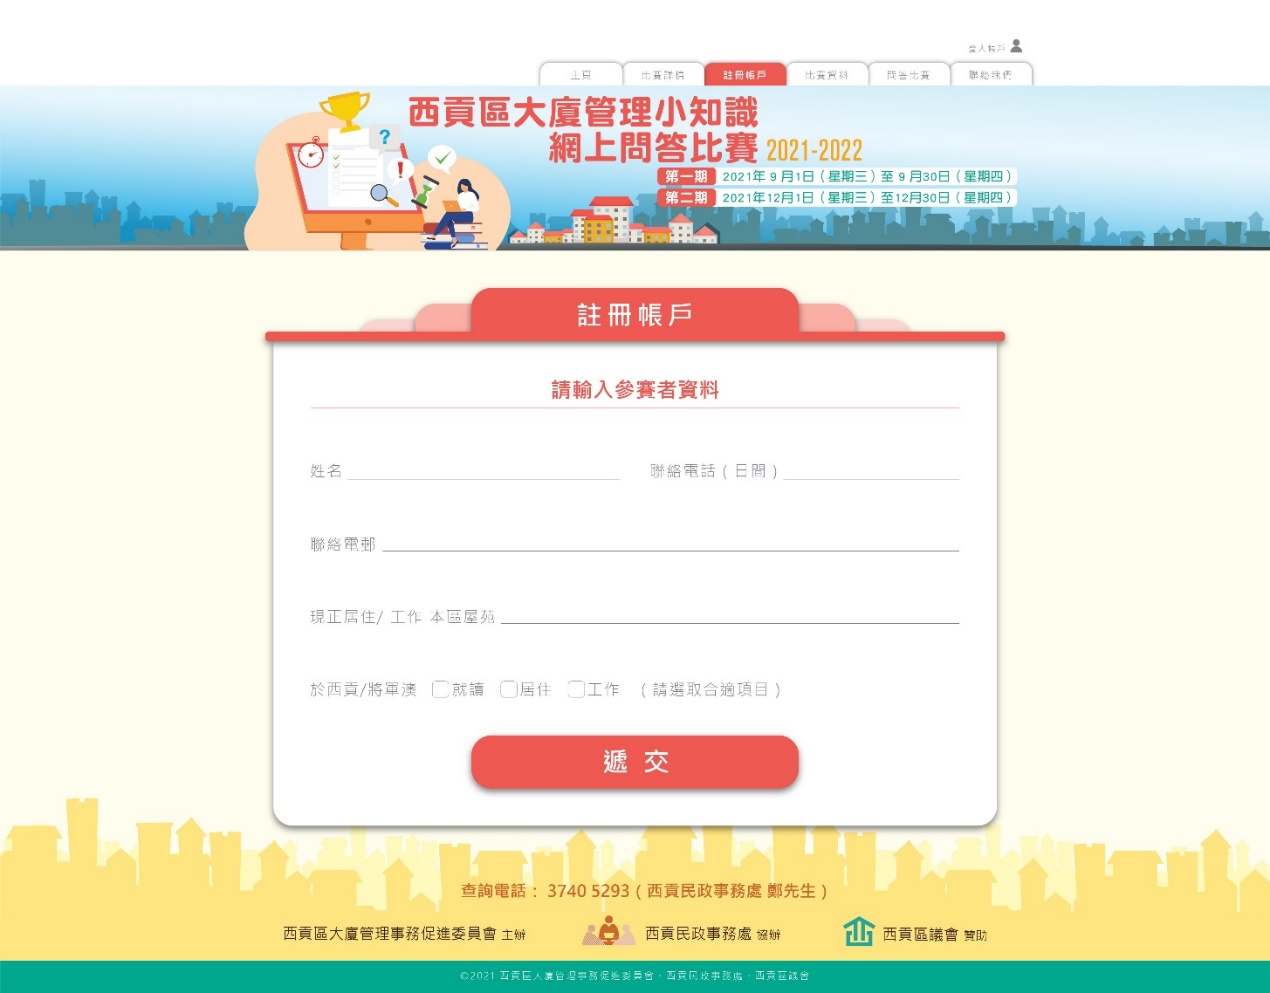 Sai Kung District Building Management Online Quiz Competition 2021-2022 (1st Round)
(1 to 30 September 2021)